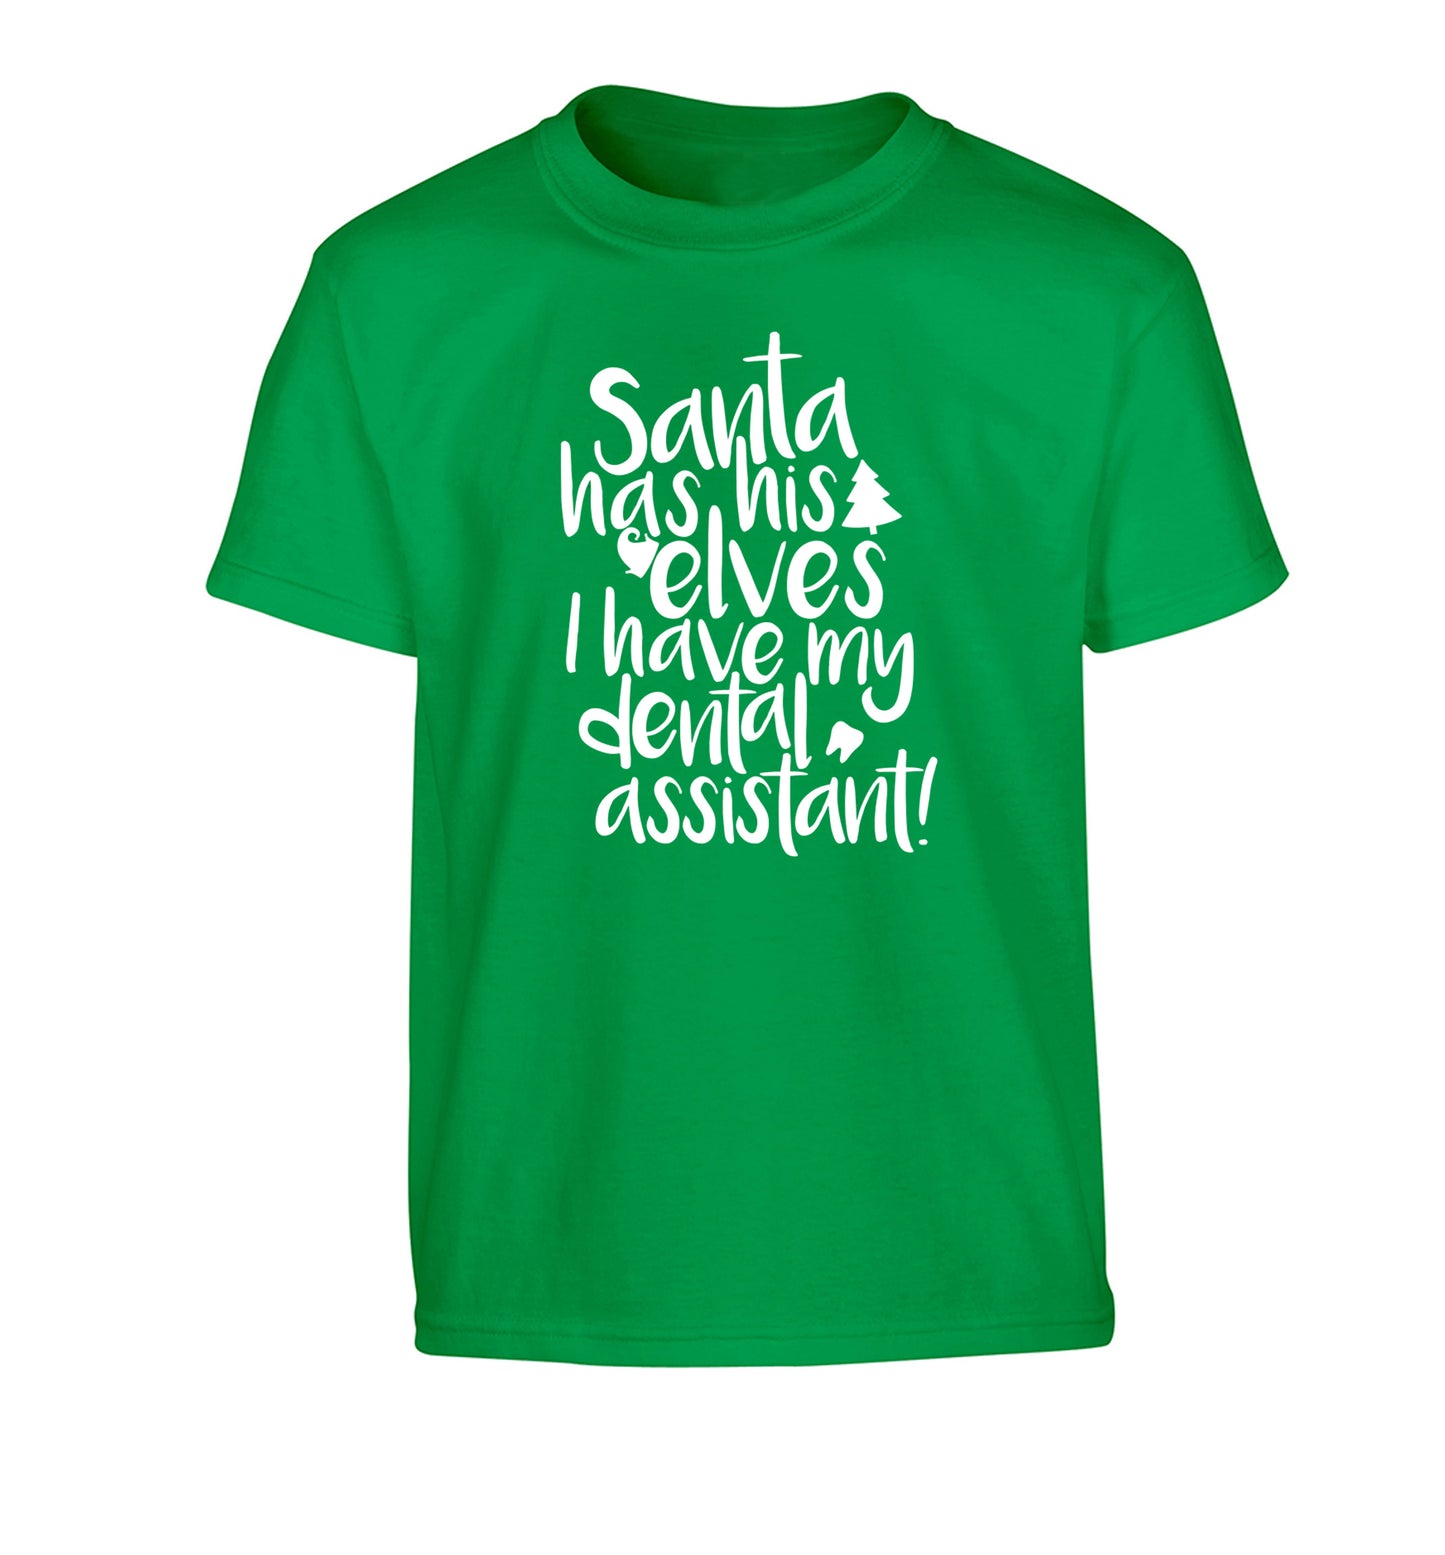 Santa has his elves I have my dental assistant Children's green Tshirt 12-14 Years